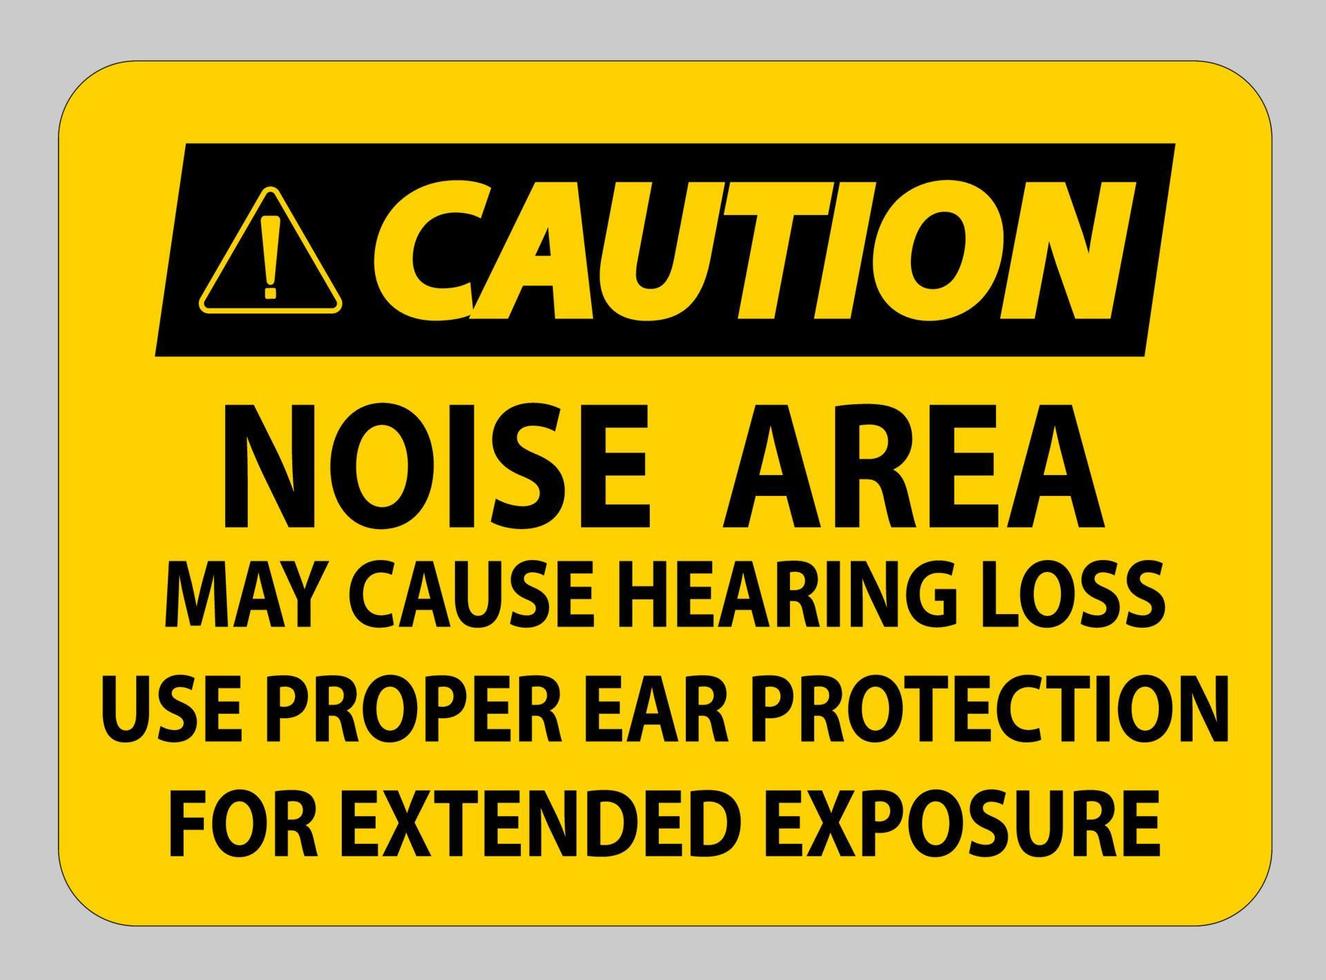 Caution PPE Sign, Noise Area May Cause Hearing Loss, Use Proper Ear Protection For Extended Exposure vector